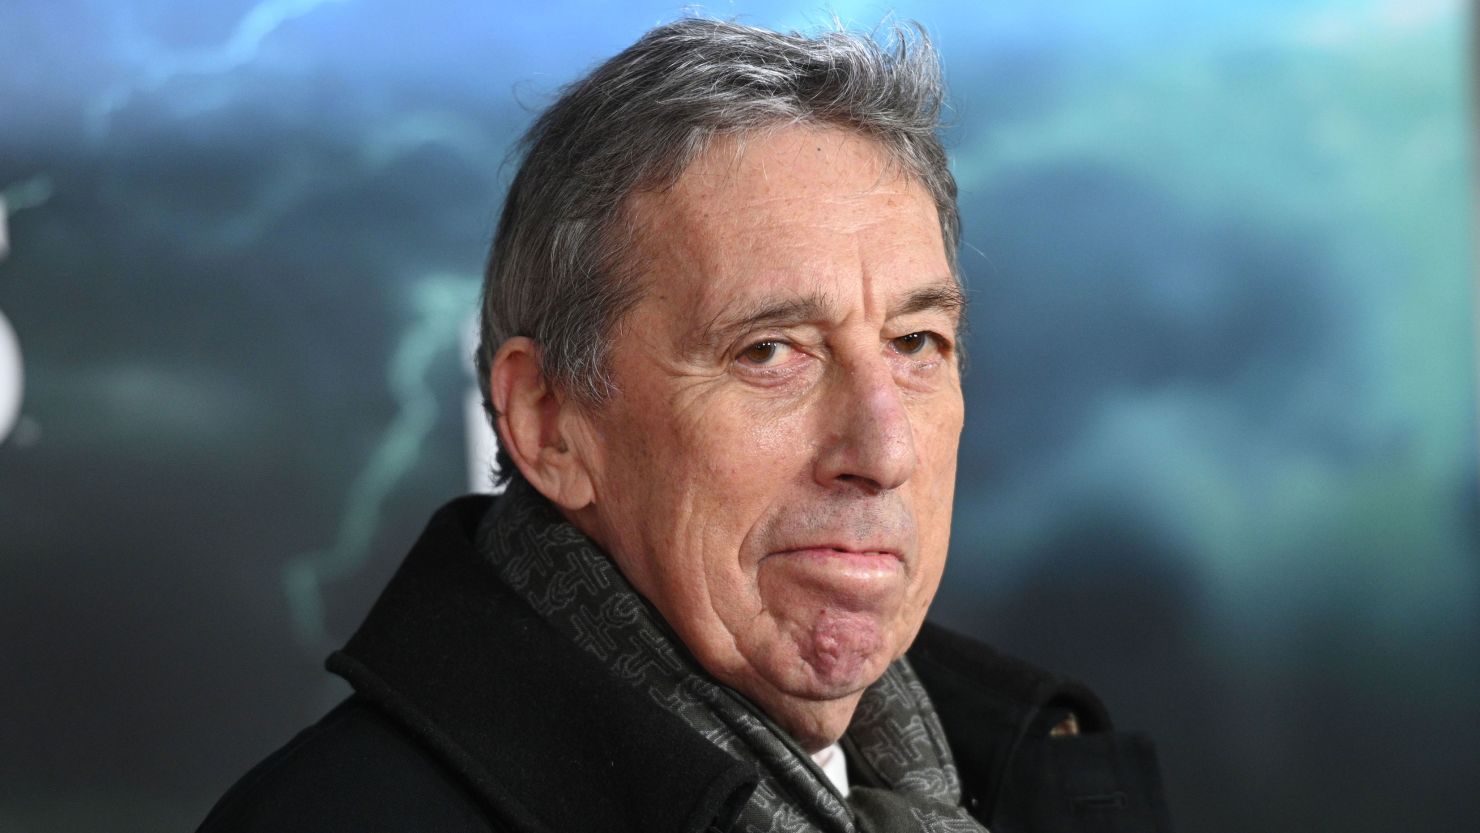 Ivan Reitman at the 'Ghostbusters: Afterlife' premiere in New York on November 15, 2021.